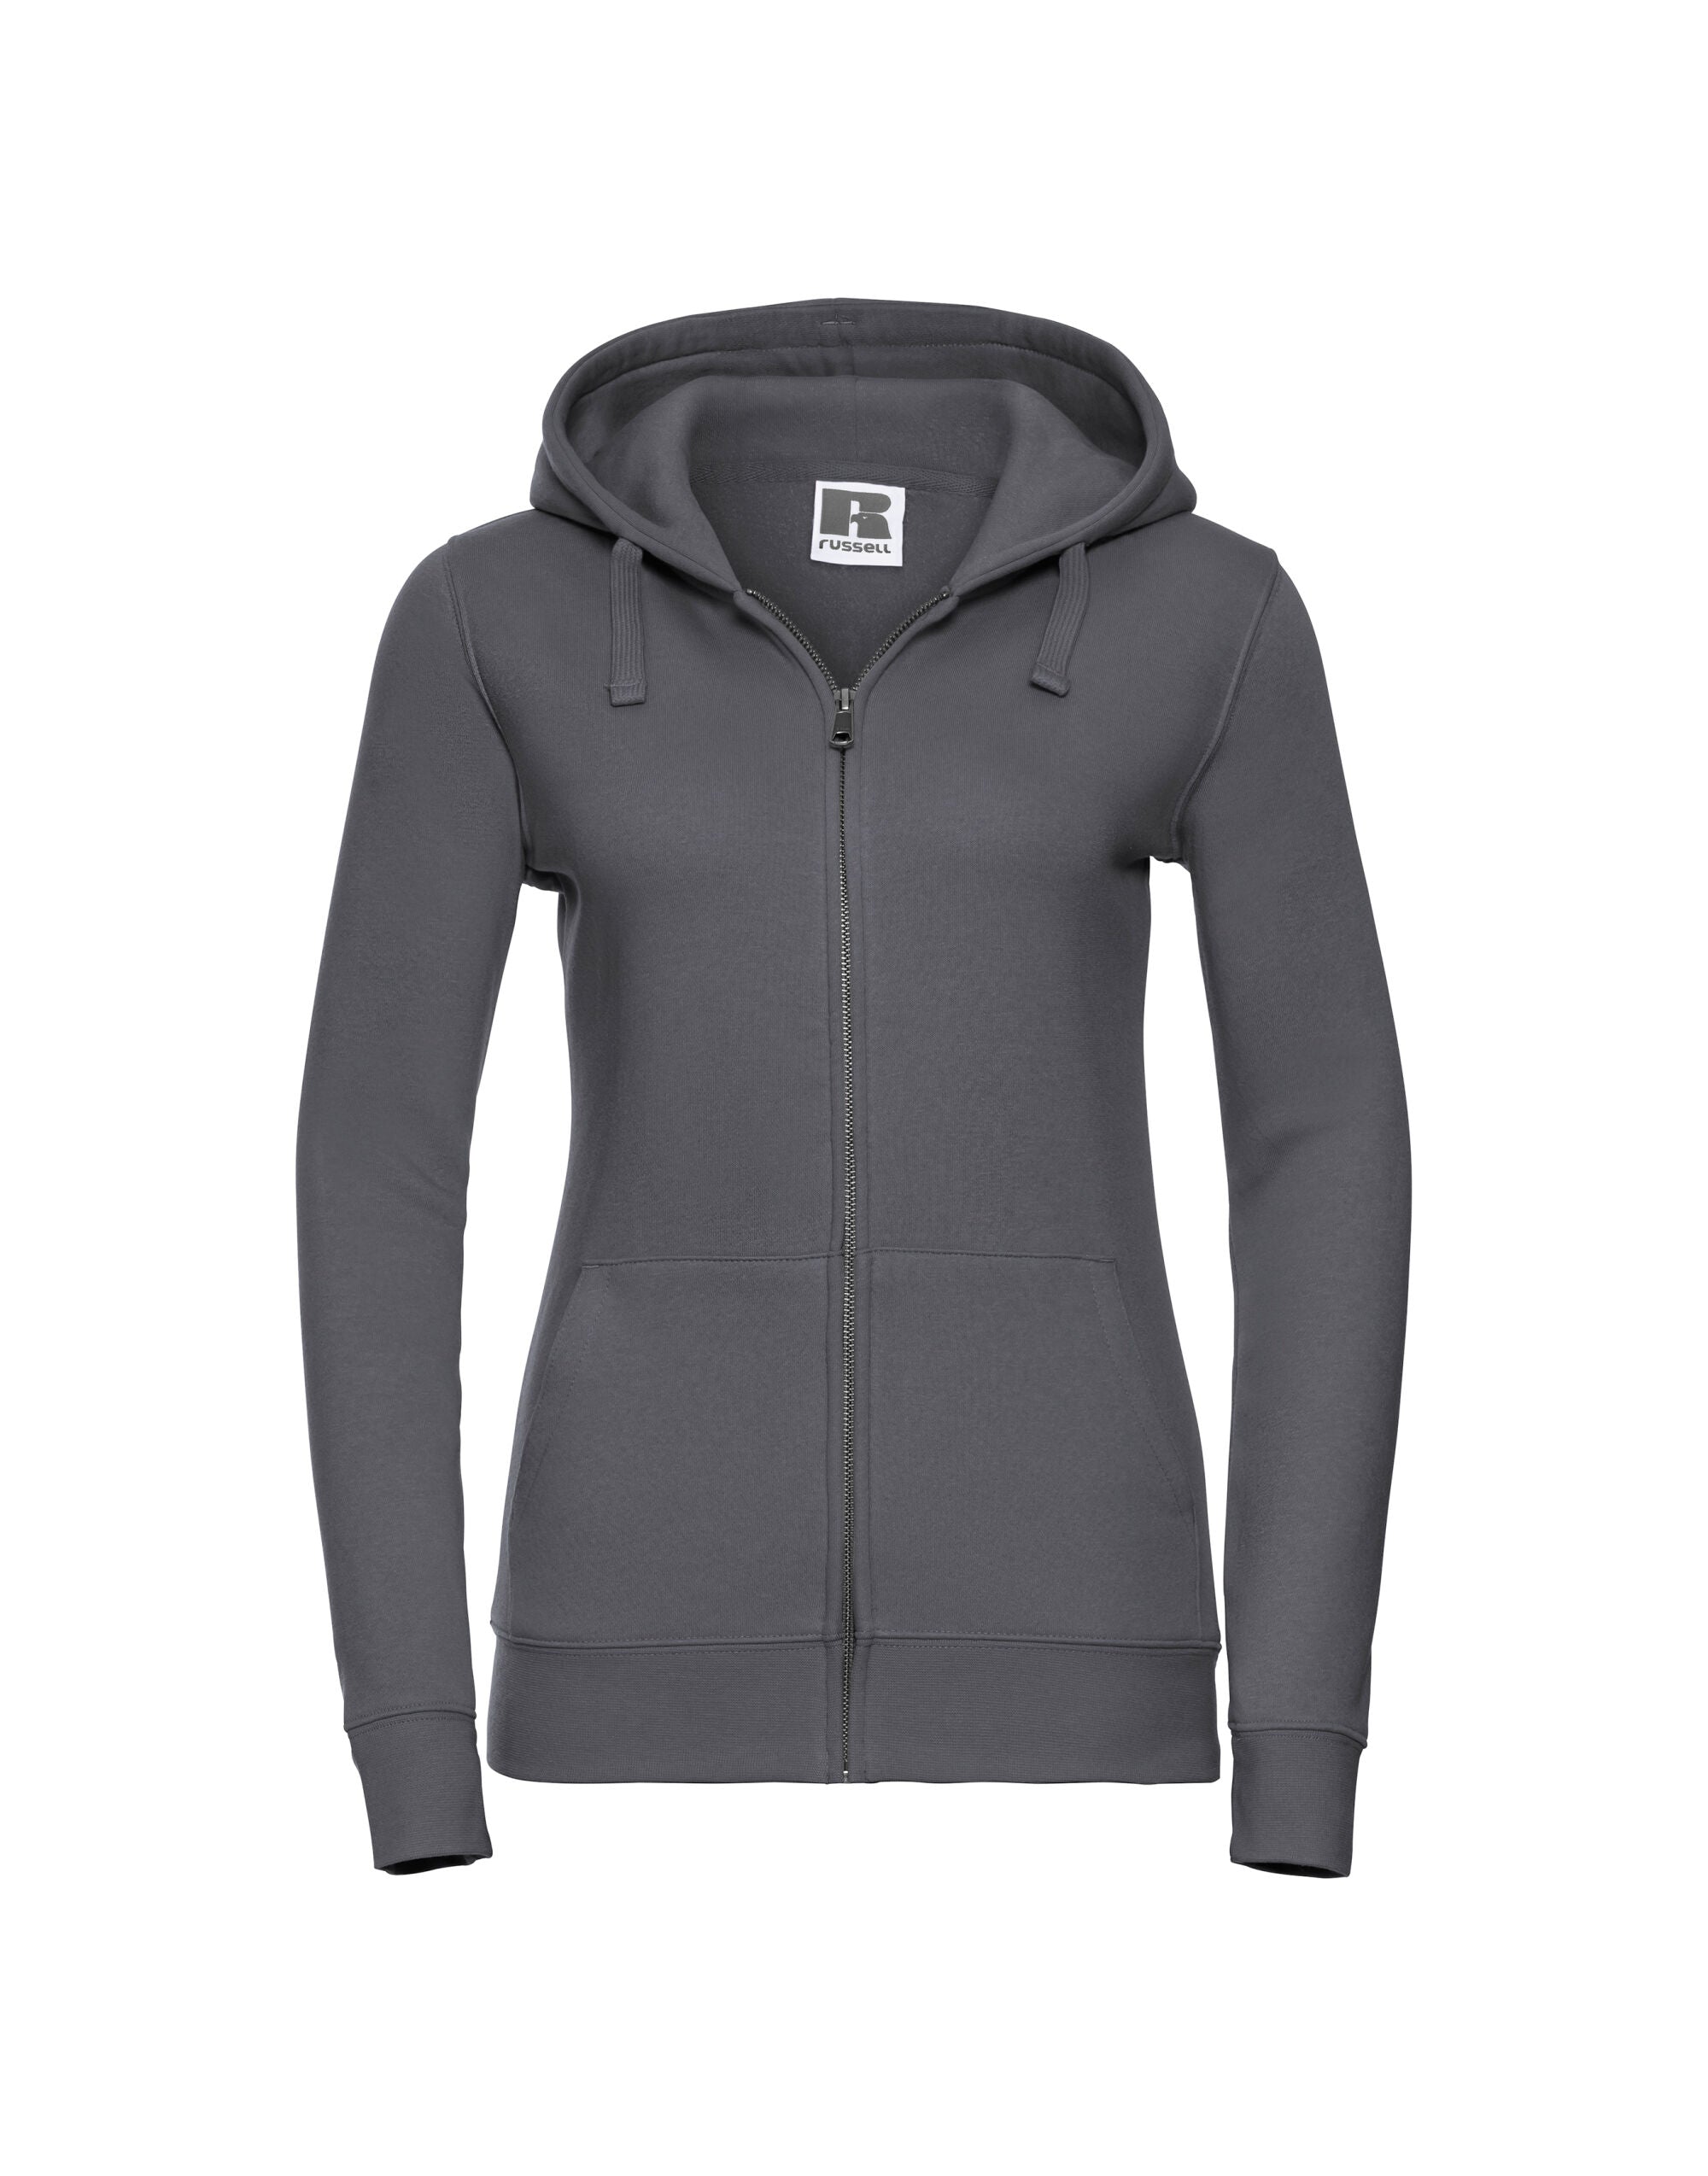 Russell Ladies' Authentic Zipped Hood Jacket Our premium with its contemporary fit and modern design revive the original spirit of Sweatshirt (266F)